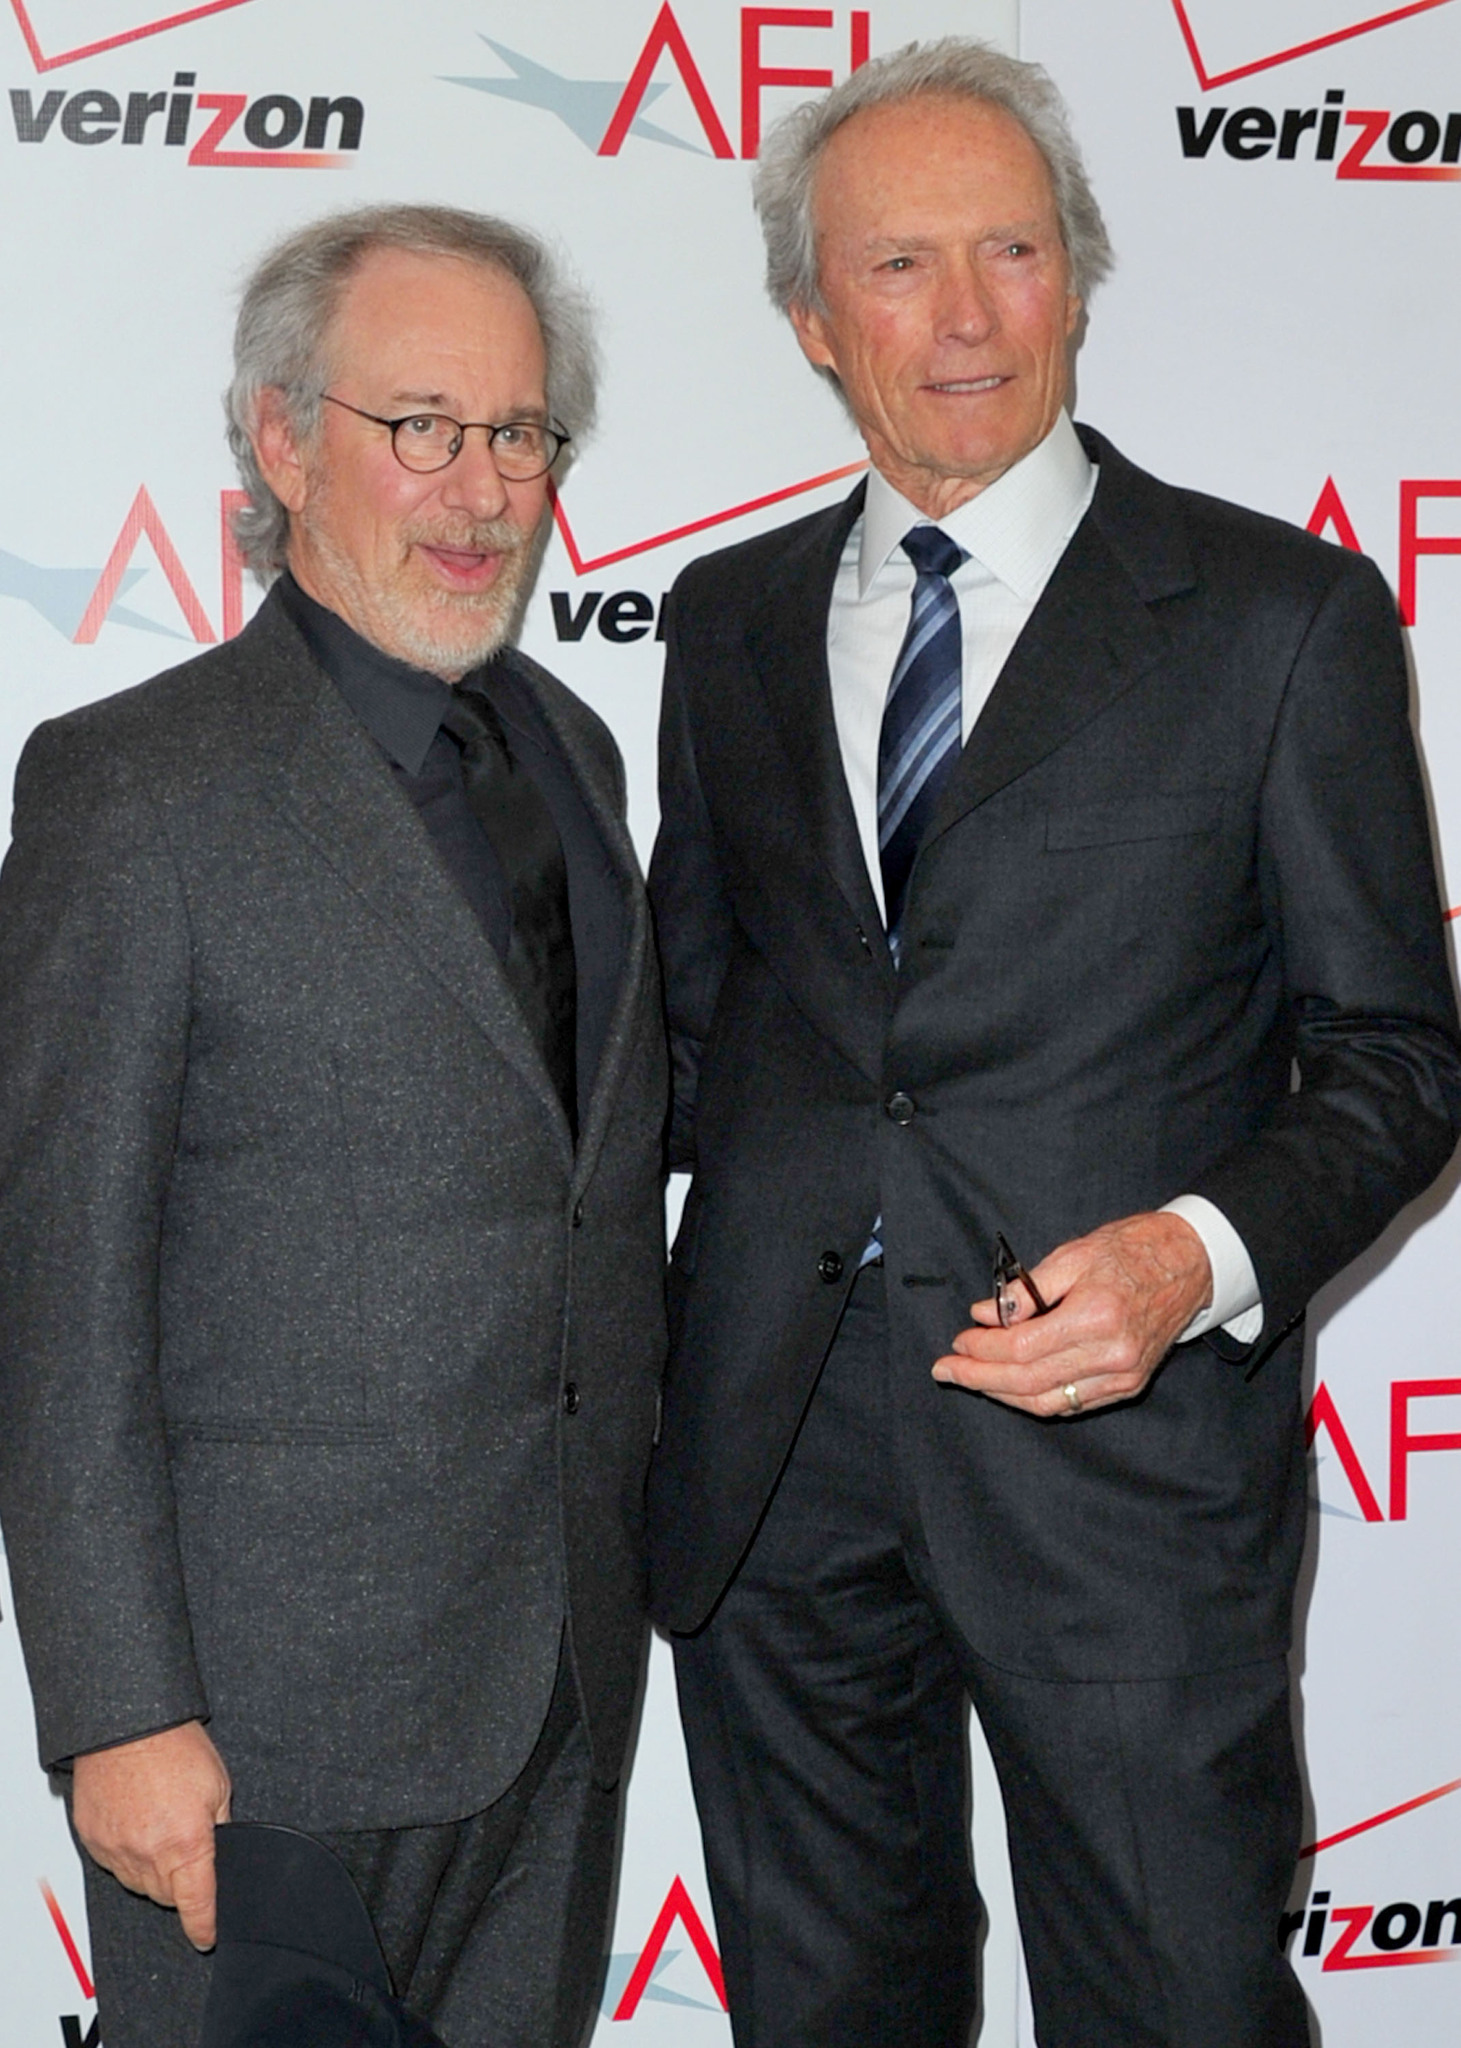 Clint Eastwood and Steven Spielberg